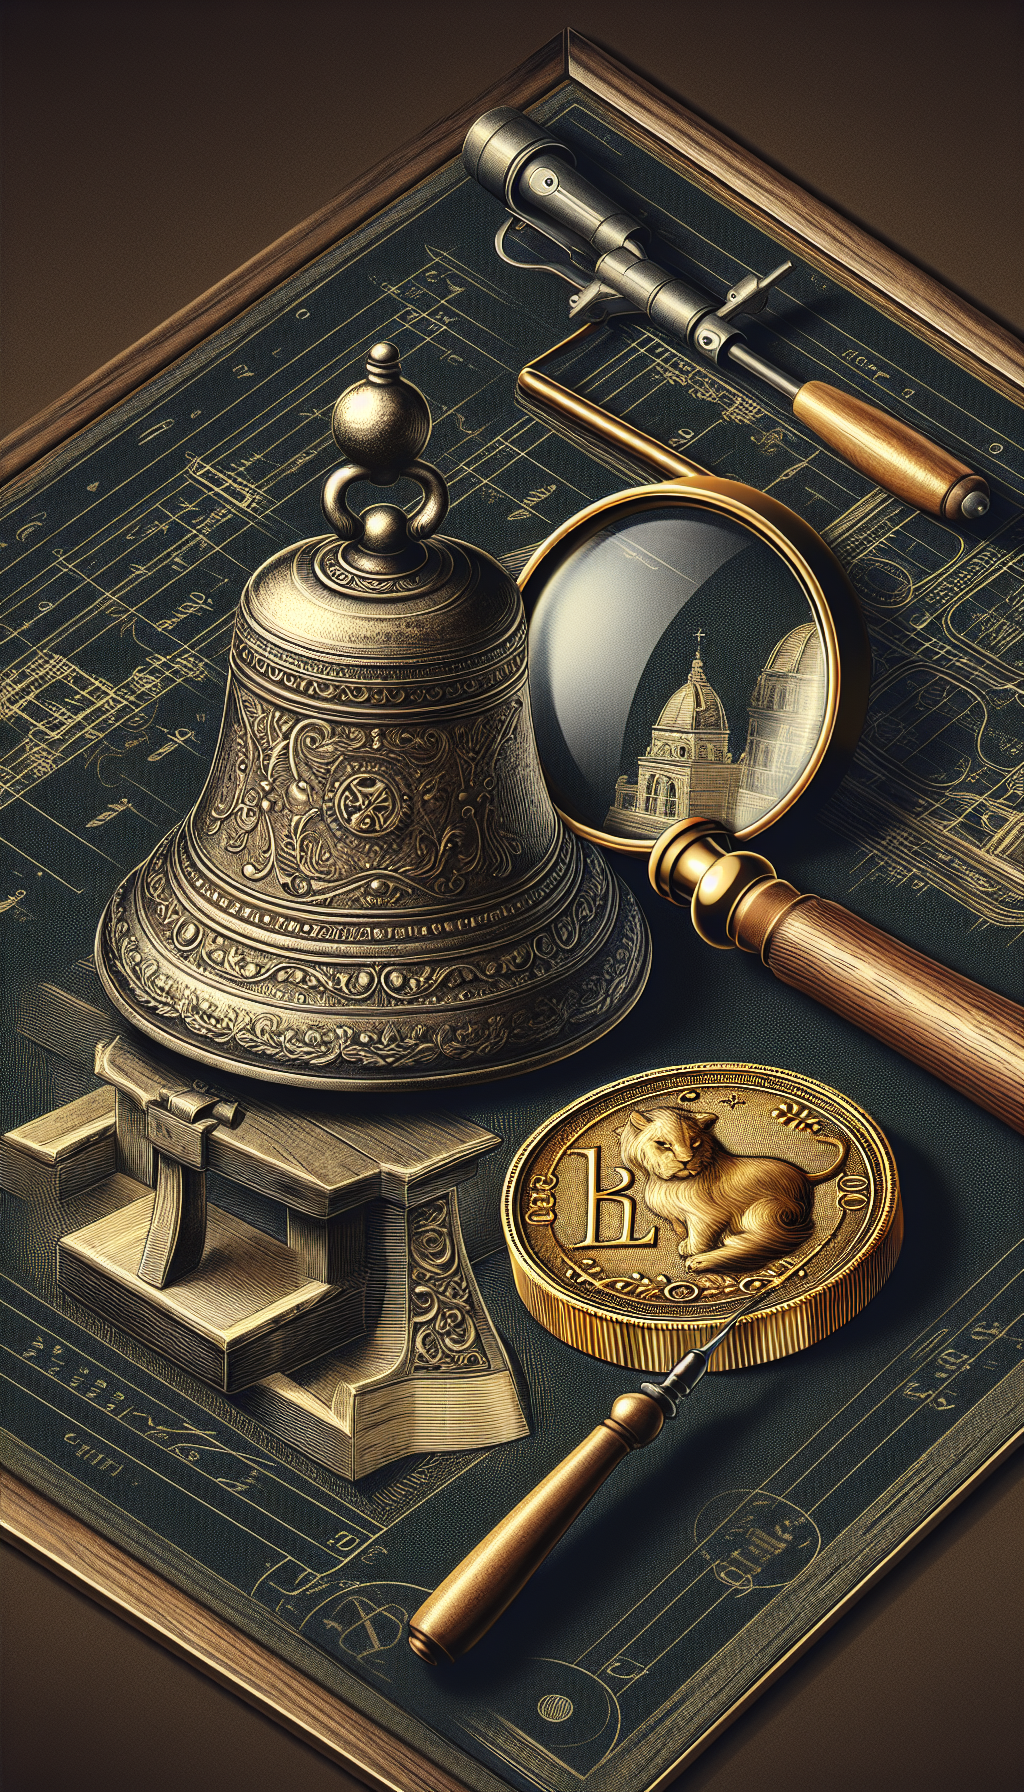 An illustration depicting an antique cast iron bell, with a magnifying glass focusing on its unique maker's mark, set against a backdrop of a golden coin and a gavel to suggest auction value. The image seamlessly blends vintage engraving style for the bell and mark, with a modern, sleek design for the coin and gavel.

16:9